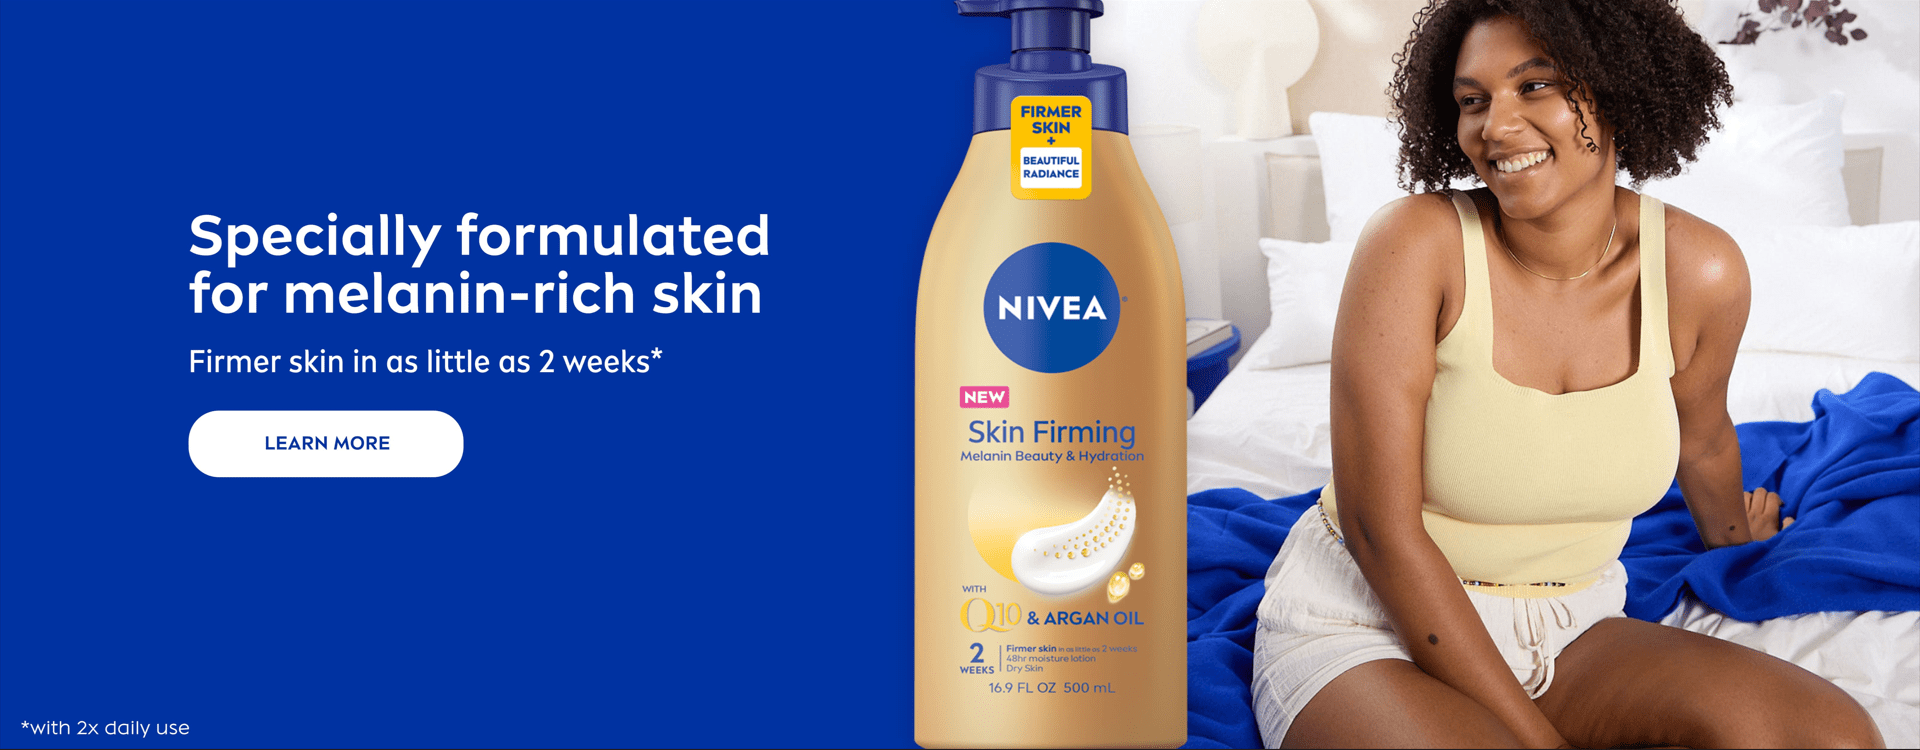 In the middle of the image, there is a bottle of Nivea Skin Firming Melanin Lotion, on the right side of the bottle is a young woman with melaninated skin smiling.  On the left side of the bottle is a blue background with text that reads "Specially formulated for melanin-rich skin.  Firmer skin in as little as two weeks.  (With twice daily use) 